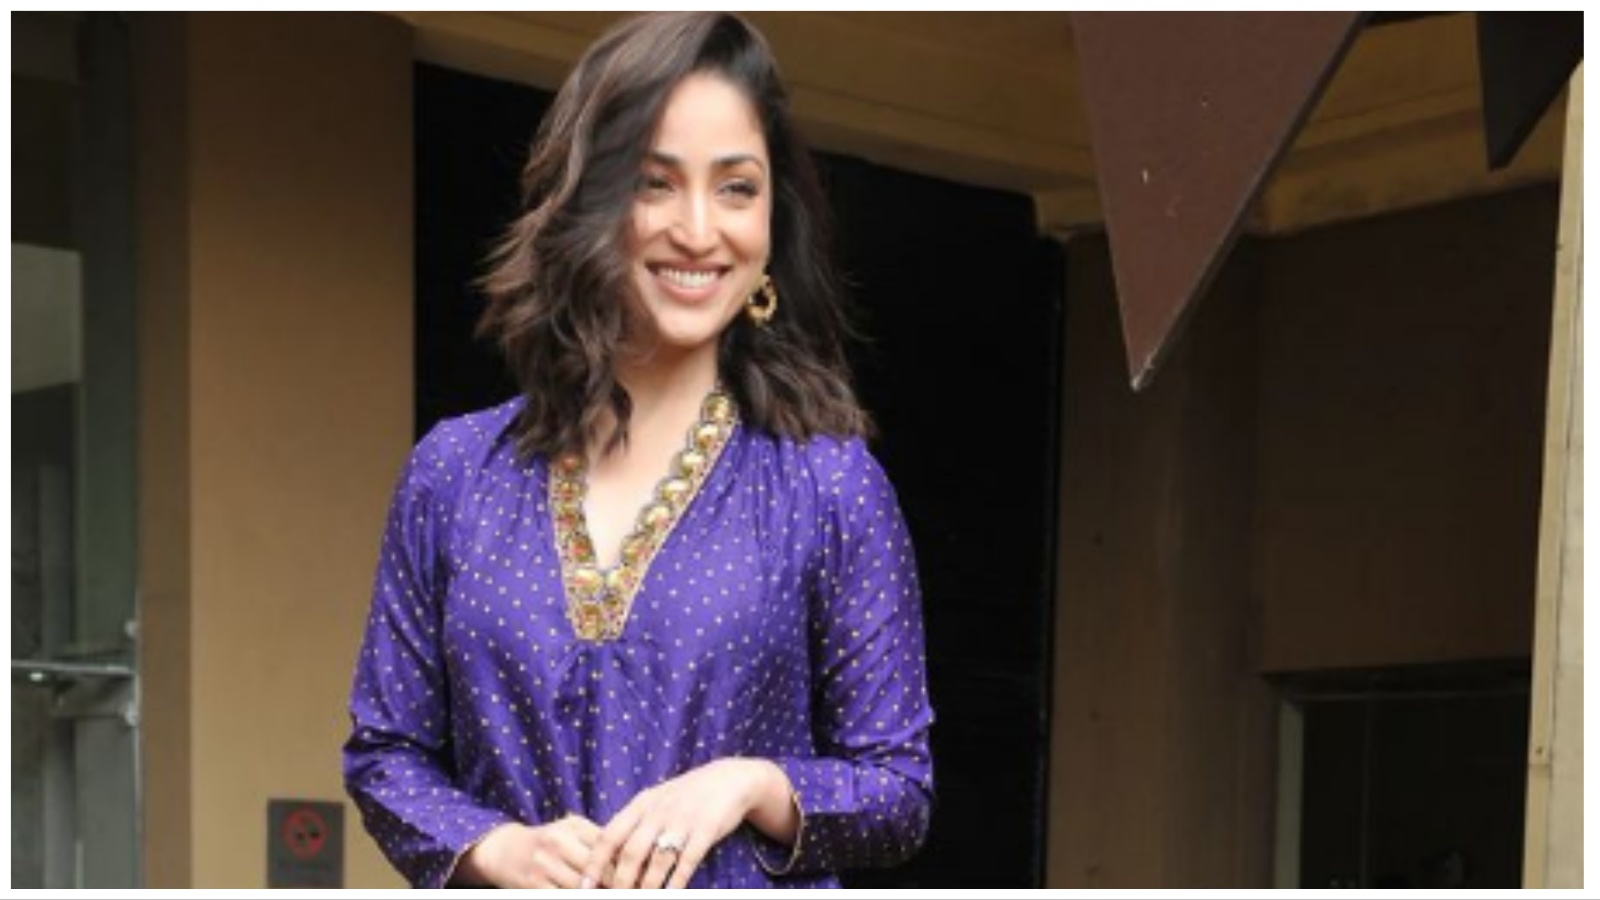 Yami Gautam recalls getting kicked out of a TV show for asking questions: ‘A person told me to go home’ | Bollywood News